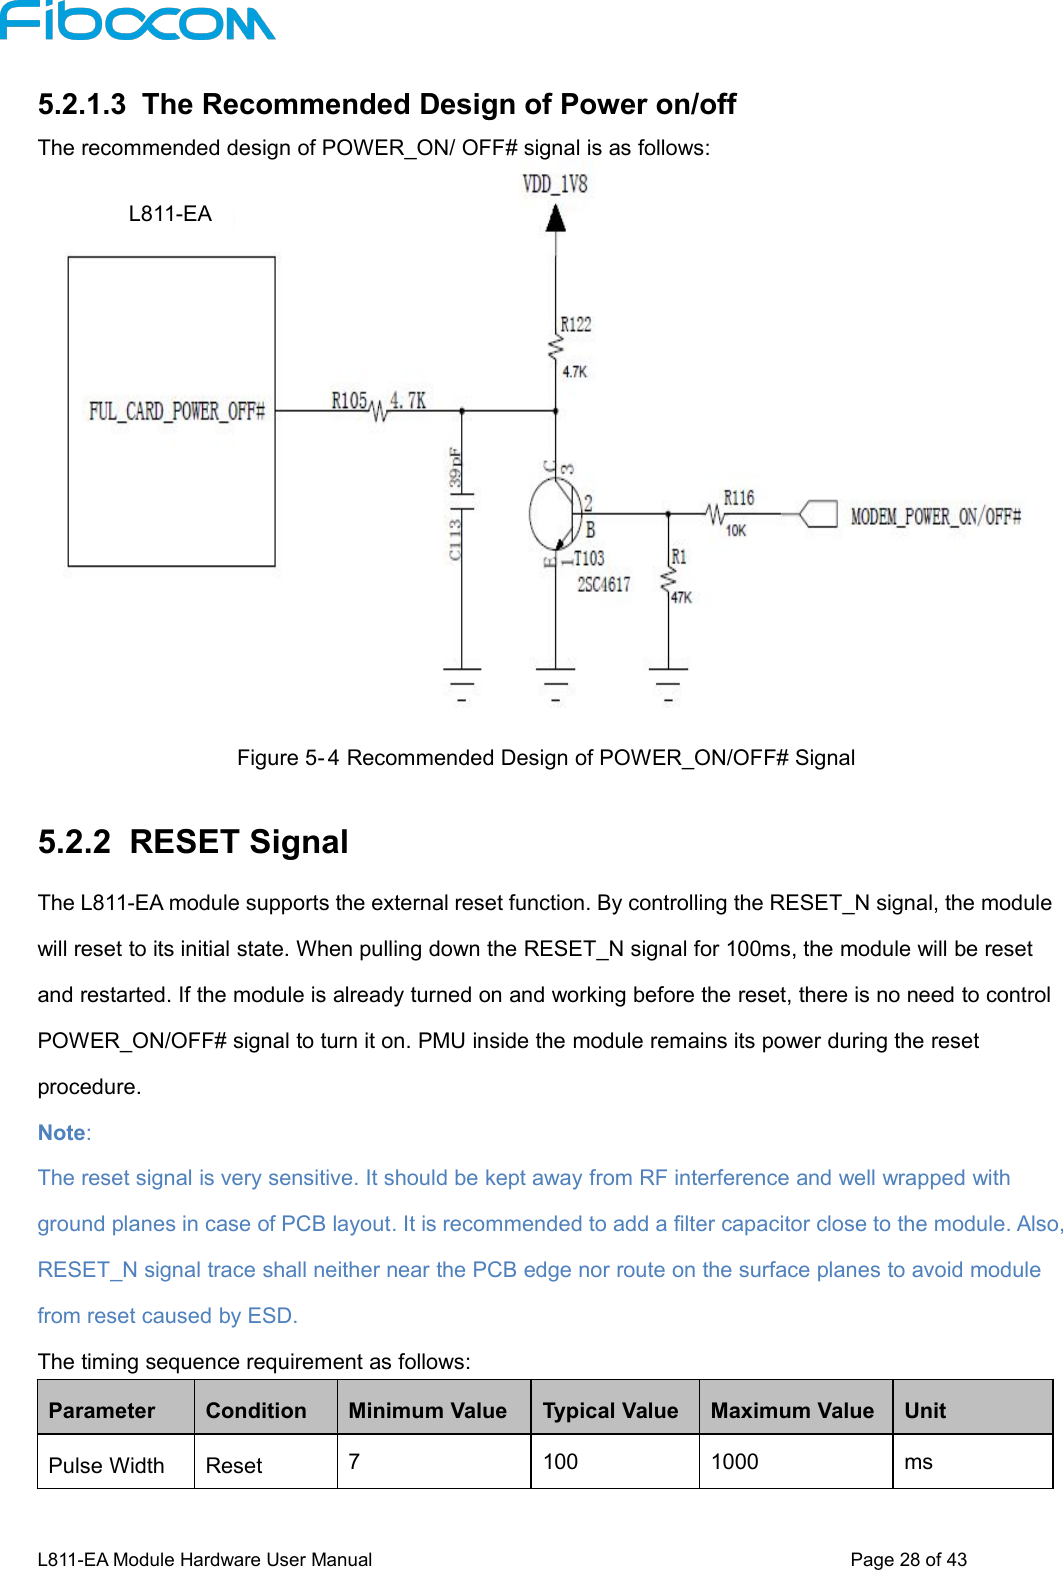 L811-EA Module Hardware User Manual Page28of435.2.1.3 The Recommended Design of Power on/offThe recommended design of POWER_ON/ OFF# signal is as follows:Figure 5- 4 Recommended Design of POWER_ON/OFF# Signal5.2.2 RESET SignalThe L811-EA module supports the external reset function. By controlling the RESET_N signal, the modulewill reset to its initial state. When pulling down the RESET_N signal for 100ms, the module will be resetand restarted. If the module is already turned on and working before the reset, there is no need to controlPOWER_ON/OFF# signal to turn it on. PMU inside the module remains its power during the resetprocedure.Note:The reset signal is very sensitive. It should be kept away from RF interference and well wrapped withground planes in case of PCB layout. It is recommended to add a filter capacitor close to the module. Also,RESET_N signal trace shall neither near the PCB edge nor route on the surface planes to avoid modulefrom reset caused by ESD.The timing sequence requirement as follows:ParameterConditionMinimum ValueTypical ValueMaximum ValueUnitPulse WidthReset71001000msL811-EA